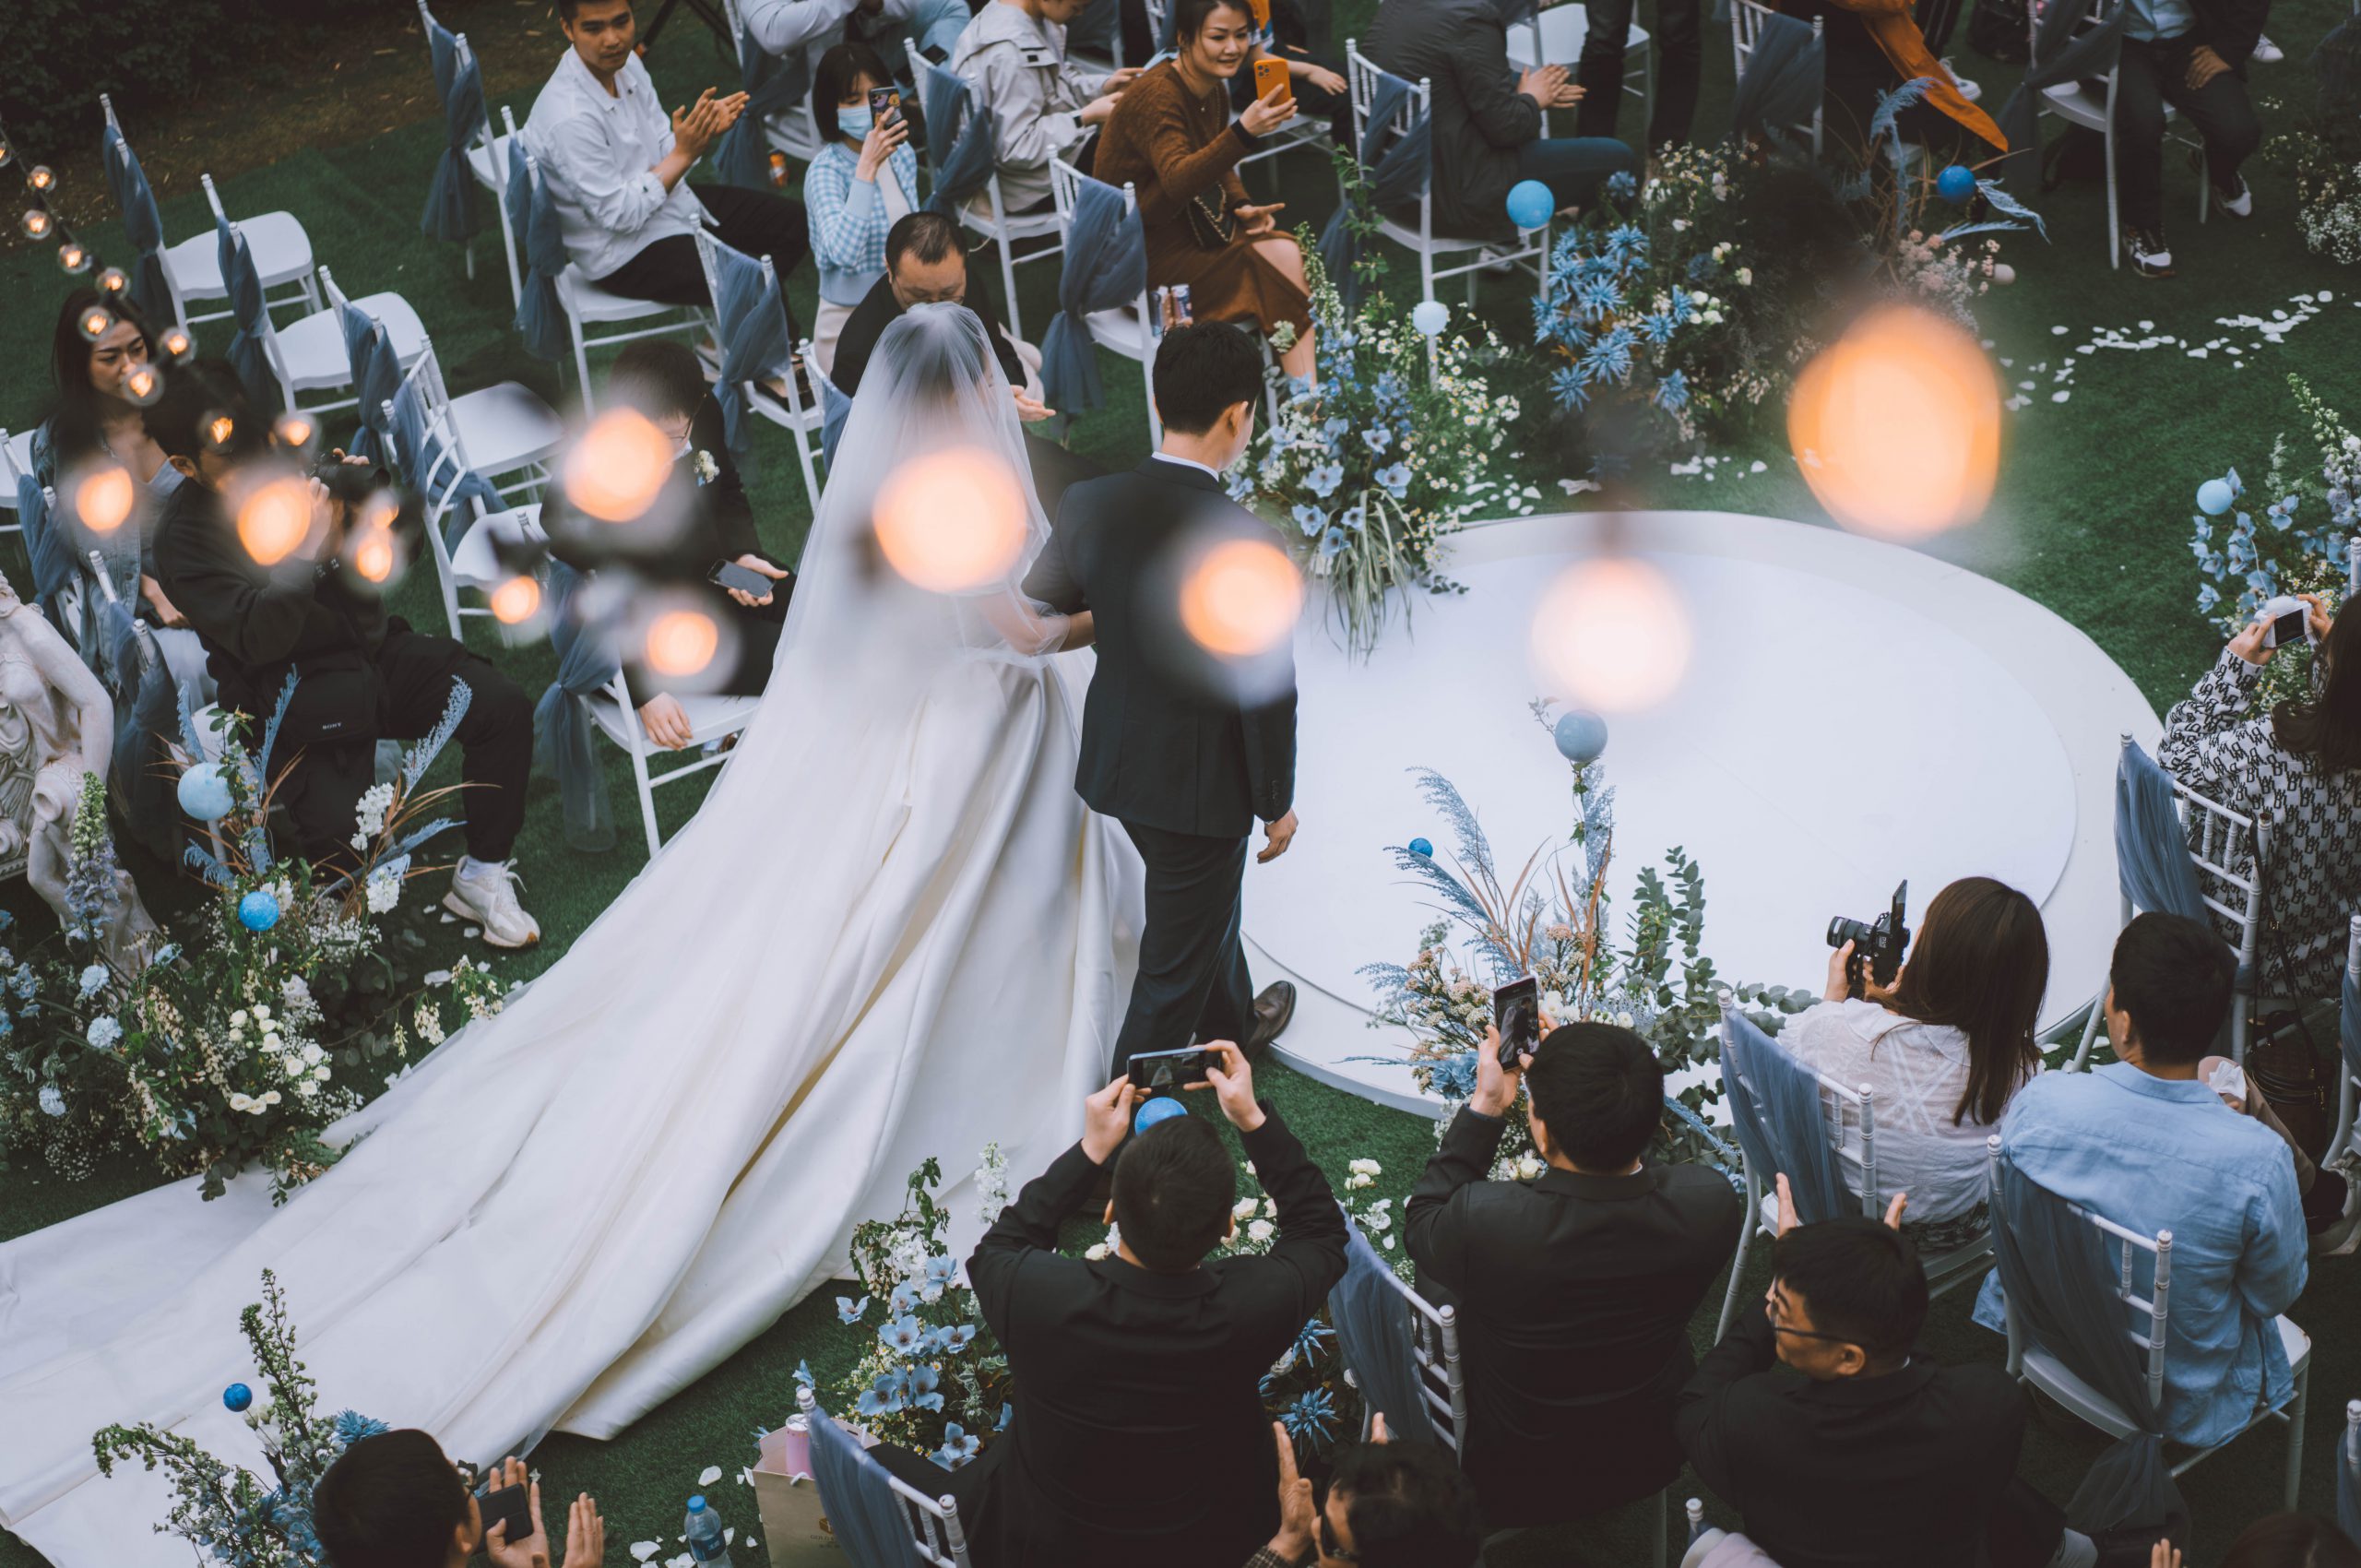 50+ Wedding Songs That Prove You Have Great Taste